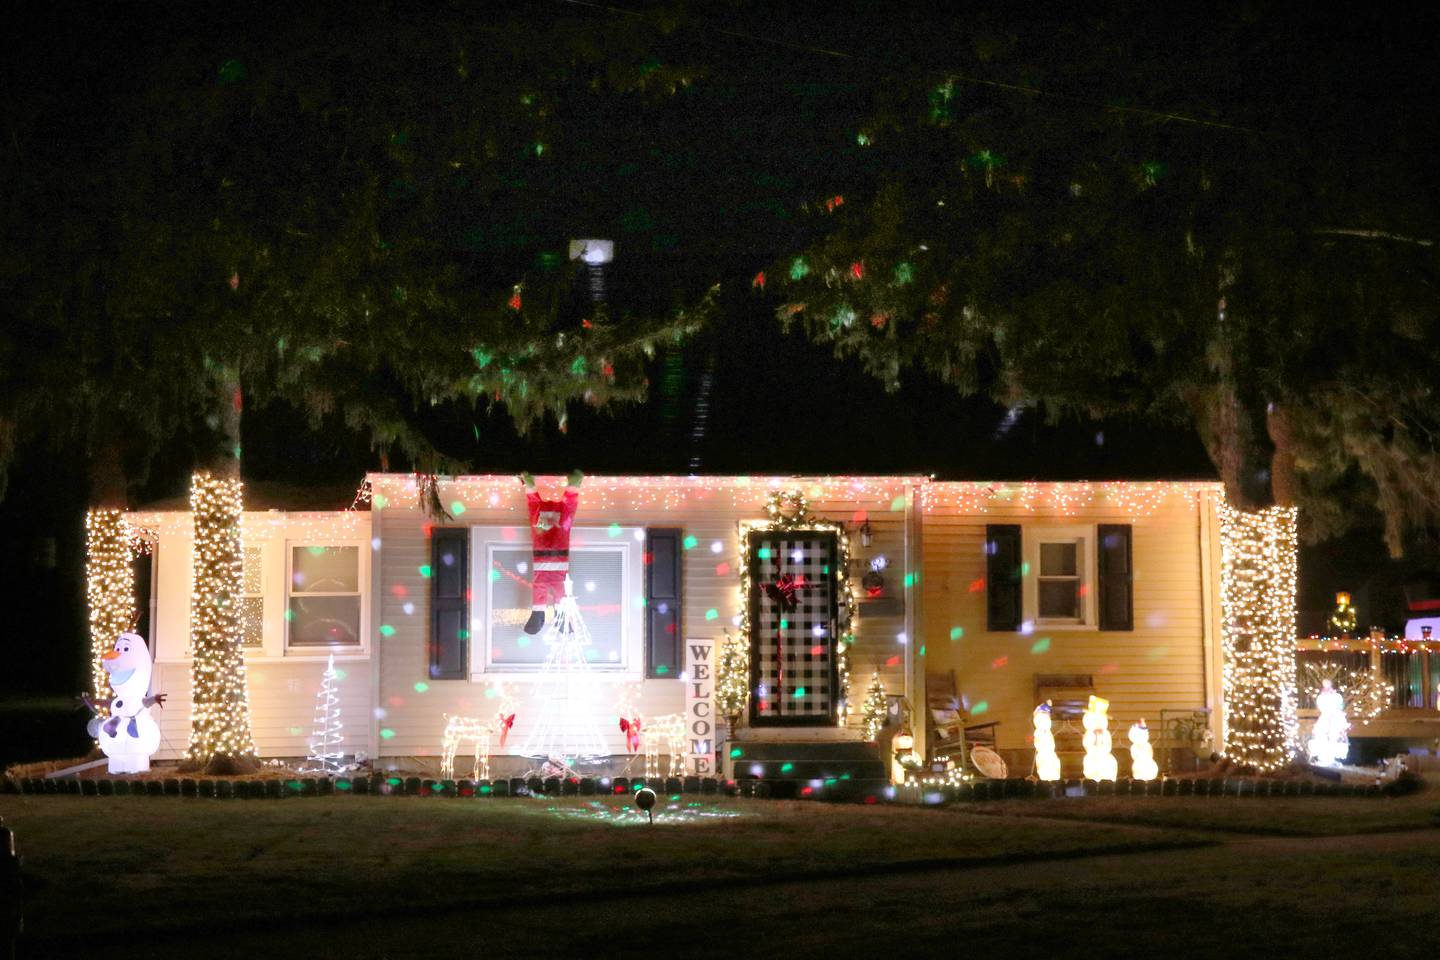 Many homes in DeKalb County were all decked out for the holidays like this one at 1622 Clark Street in DeKalb which was one of the award winners in the DeKalb Park District's Holiday House Decorating Contest.